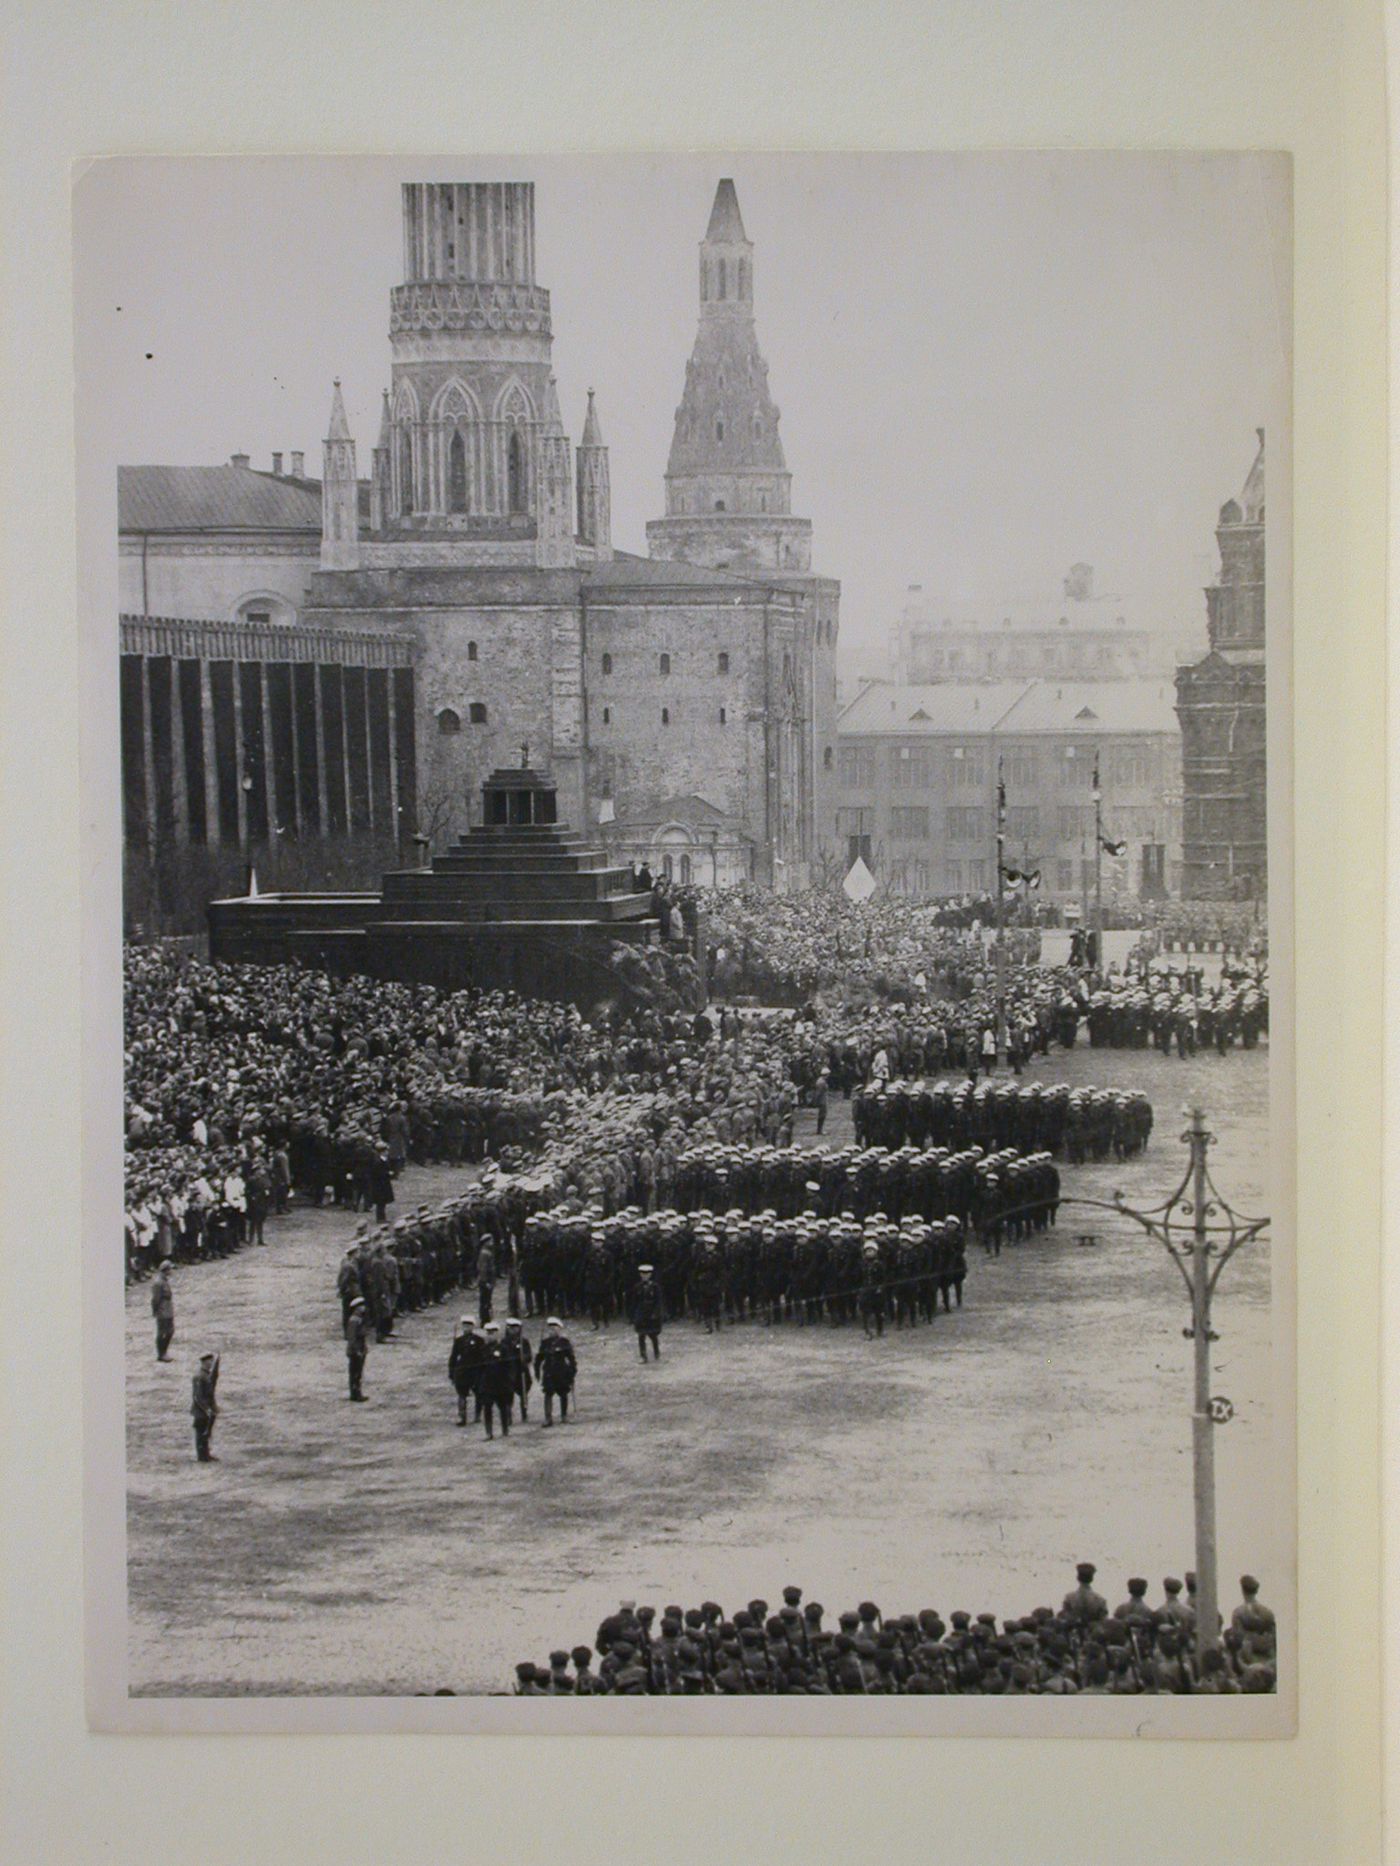 View of a May Day parade in Red Square with the second wooden Lenin Mausoleum and the Nikol'skaia Tower (Nicholas Tower) in the background, Moscow